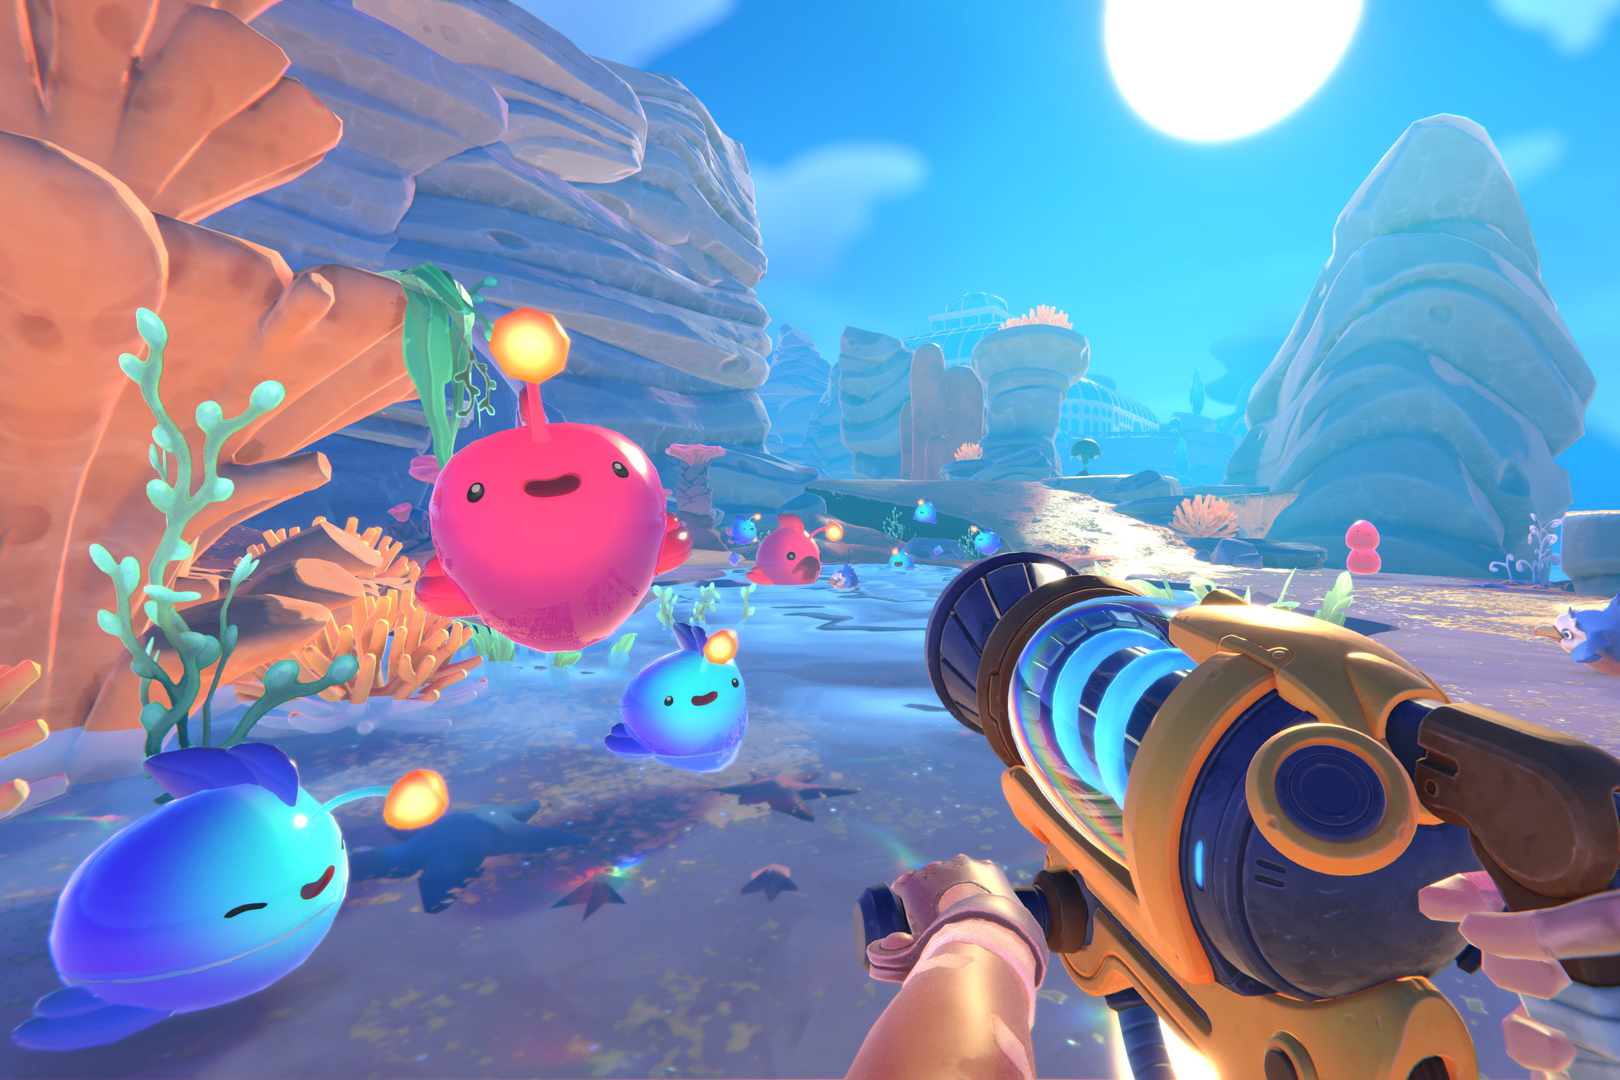 Slime Rancher (Playstation 4 / PS4) Choose from 3 game modes: Adventure,  Casual, and Rush 